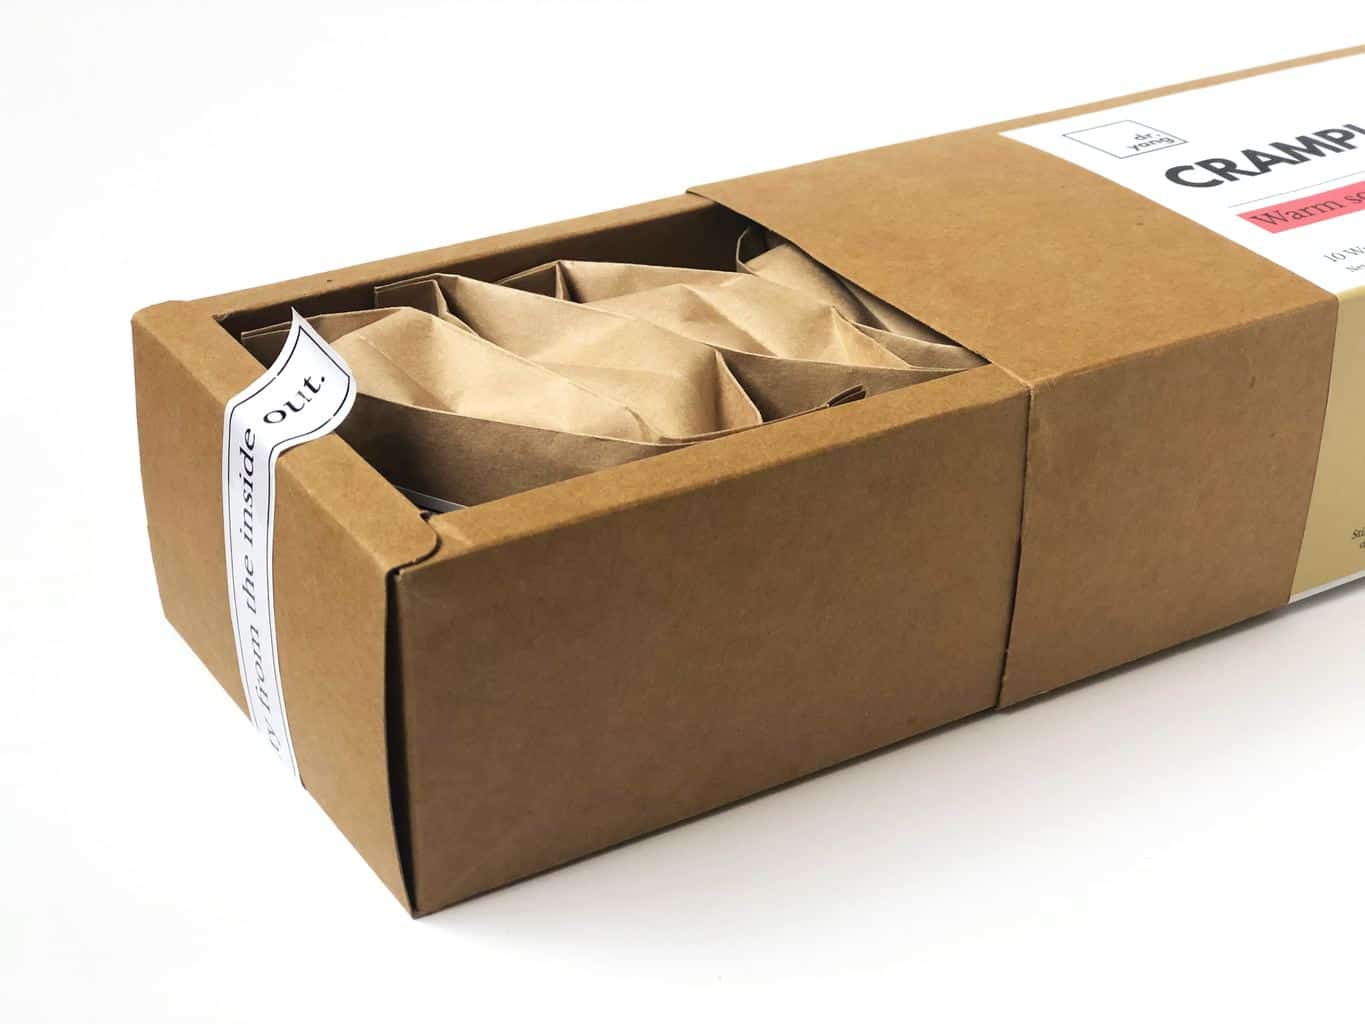 Want to Start a Subscription Box Company? Here Are the Basics